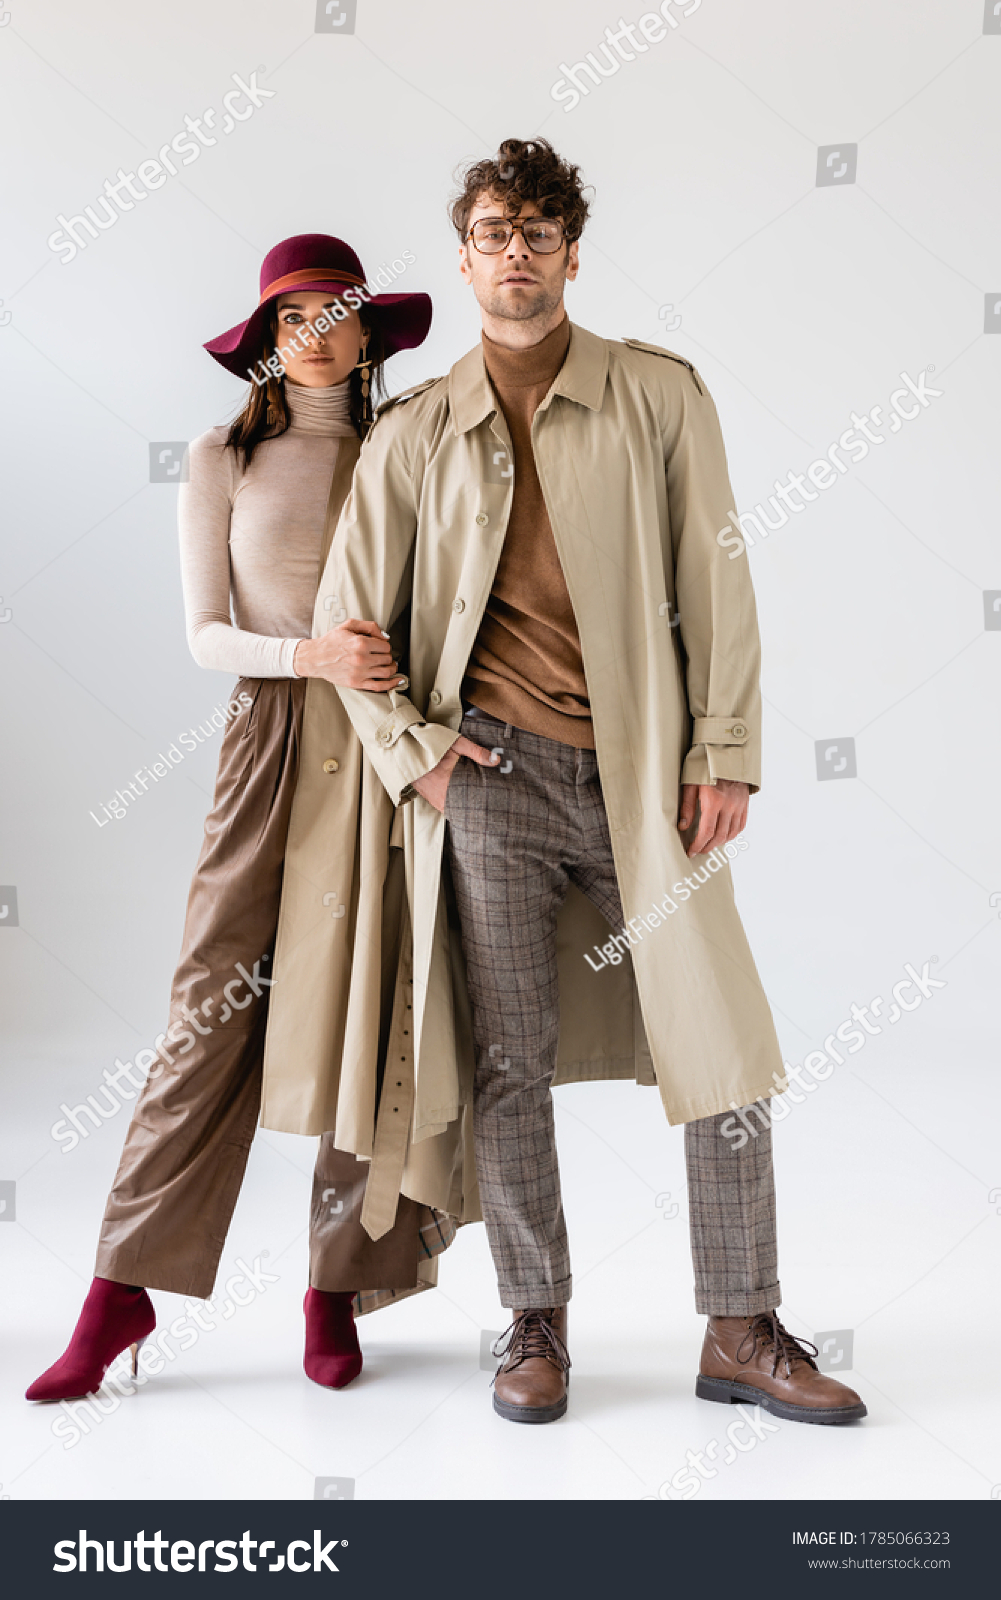 full length view of stylish woman in hat touching hand of trendy man in trench coat on grey #1785066323